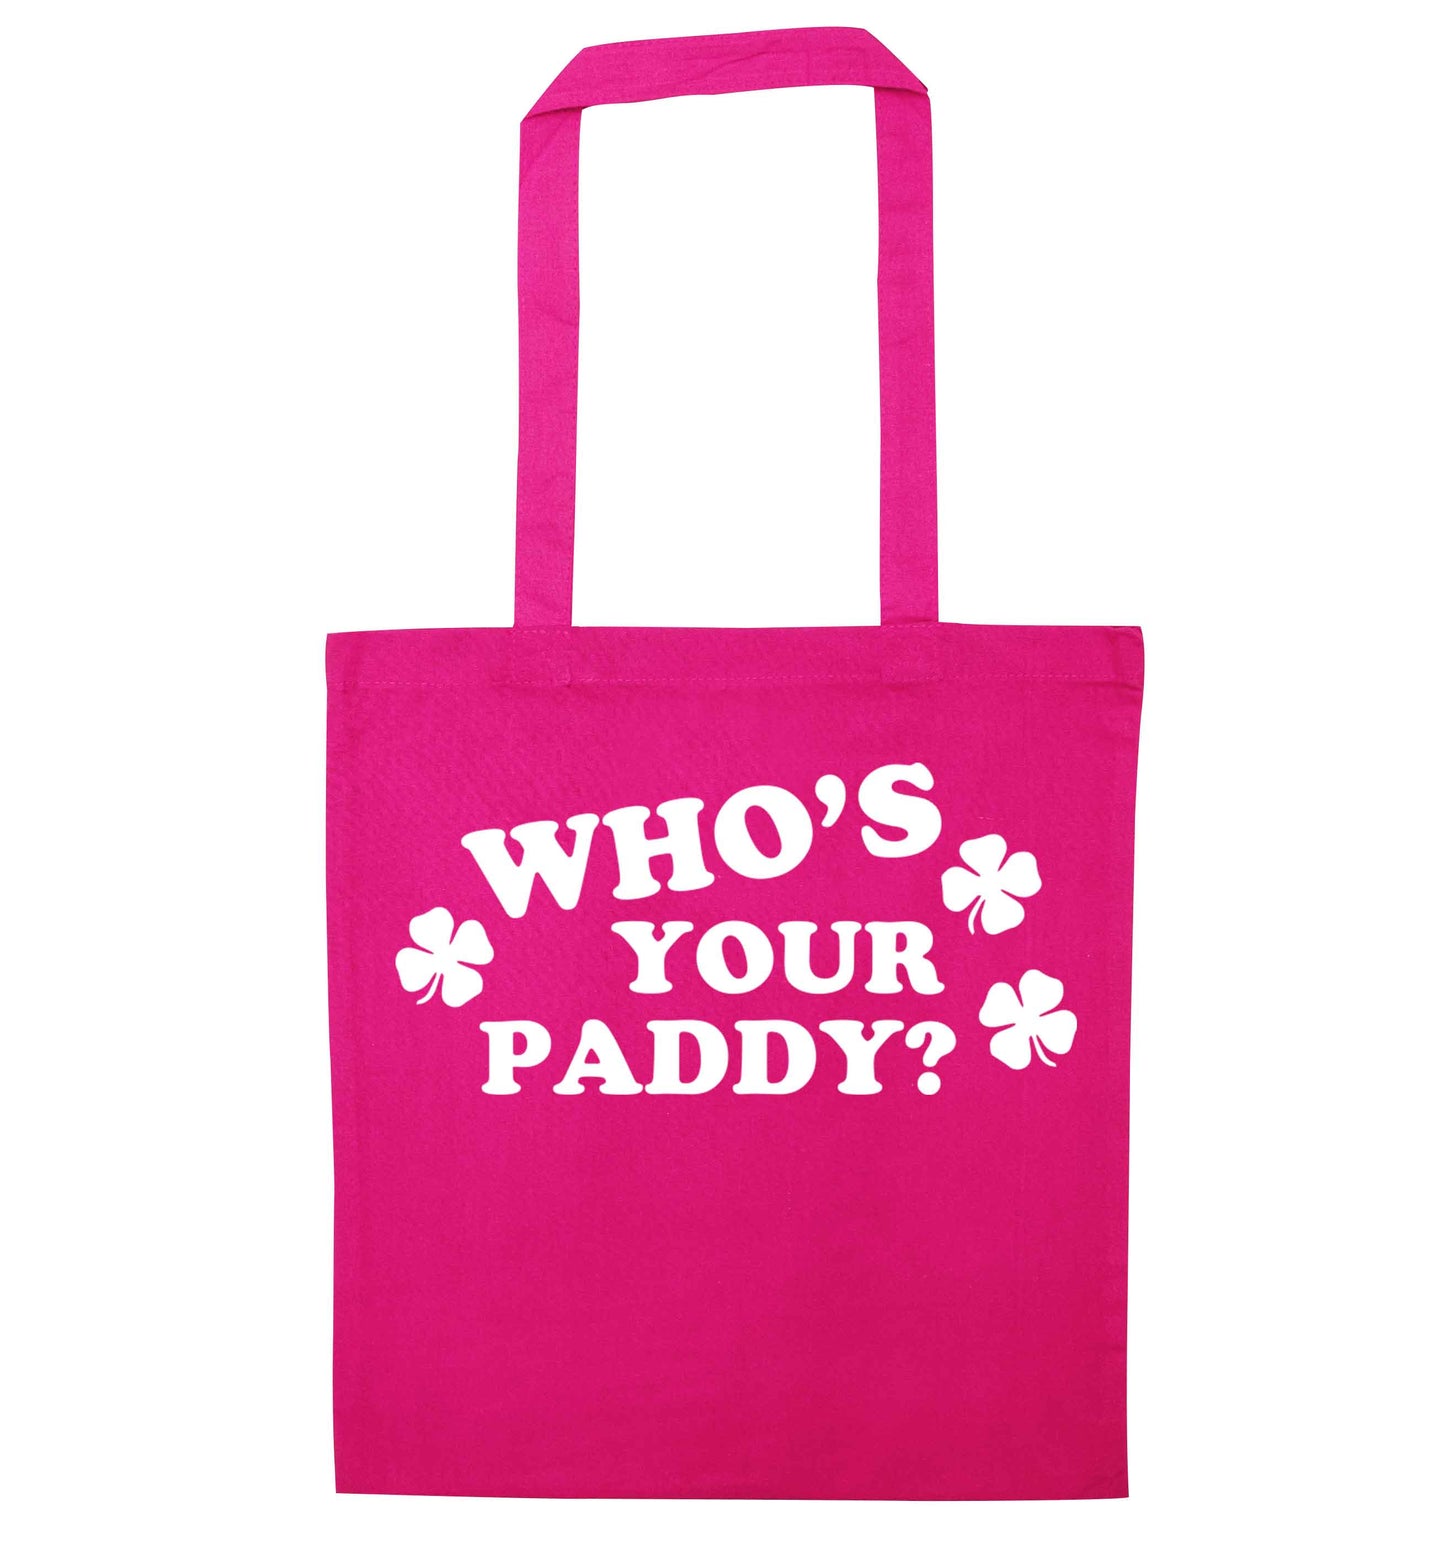 Who's your paddy? pink tote bag